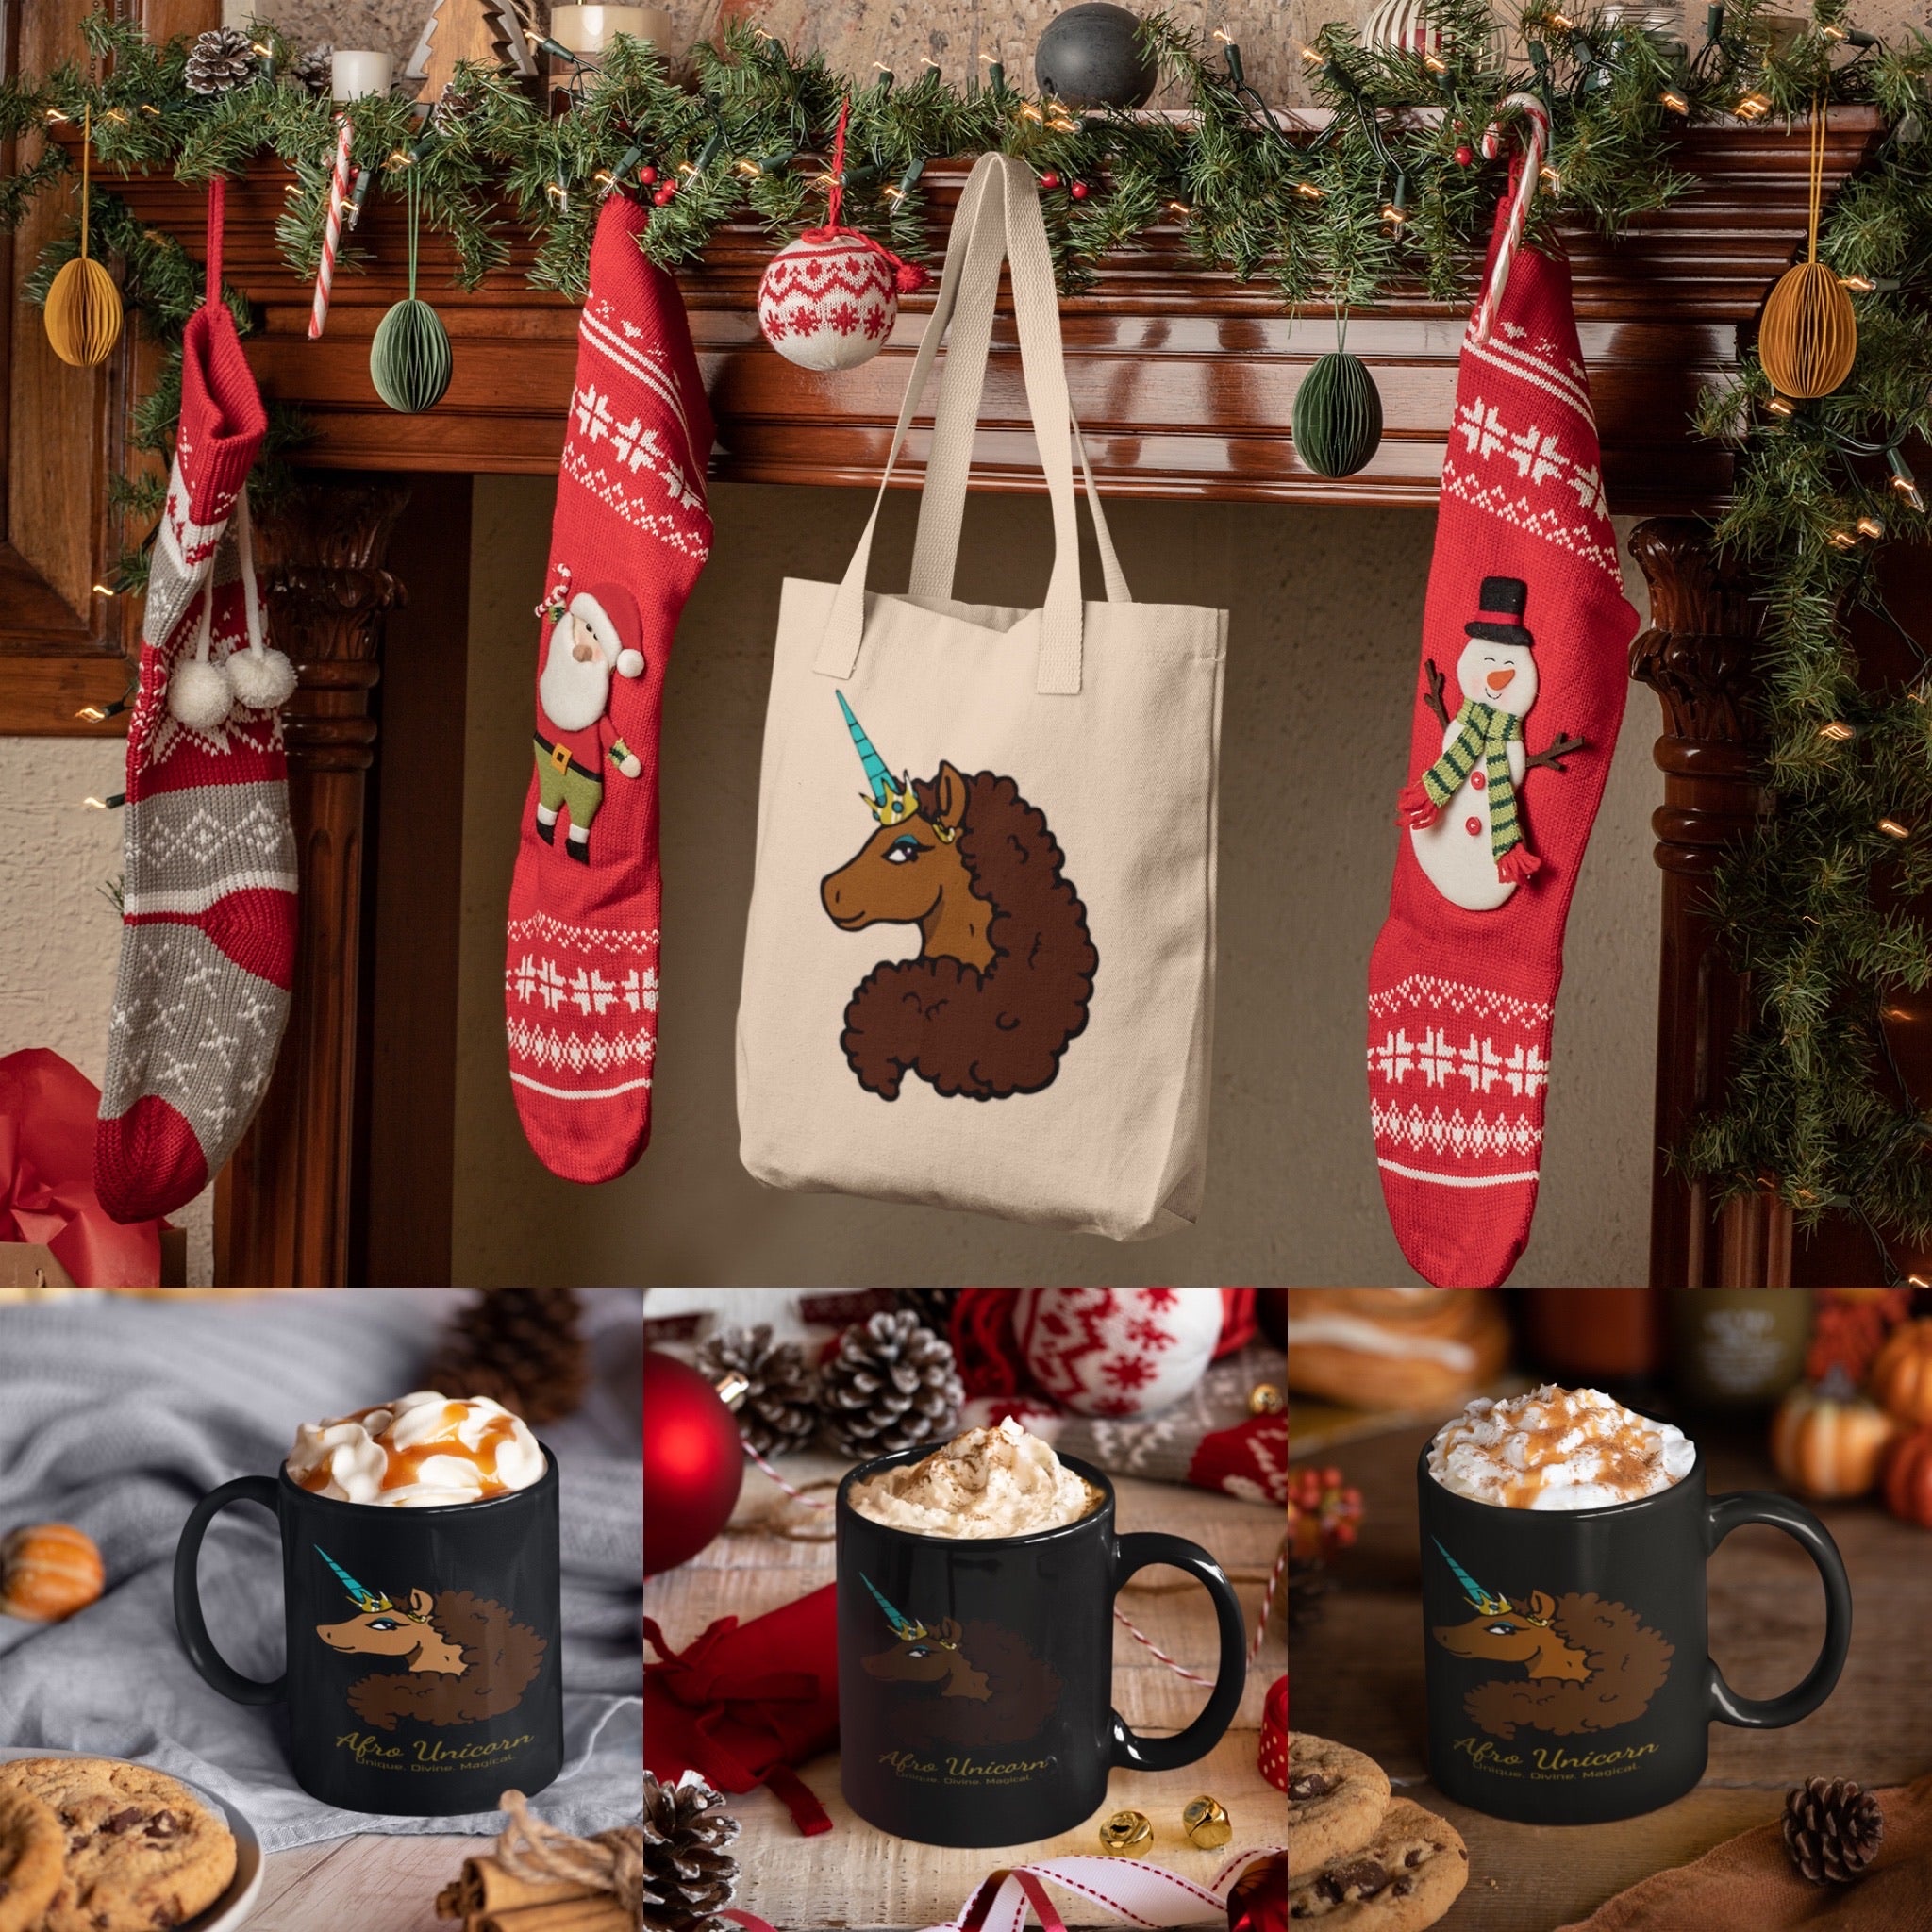 Holiday Items & Gift Ideas